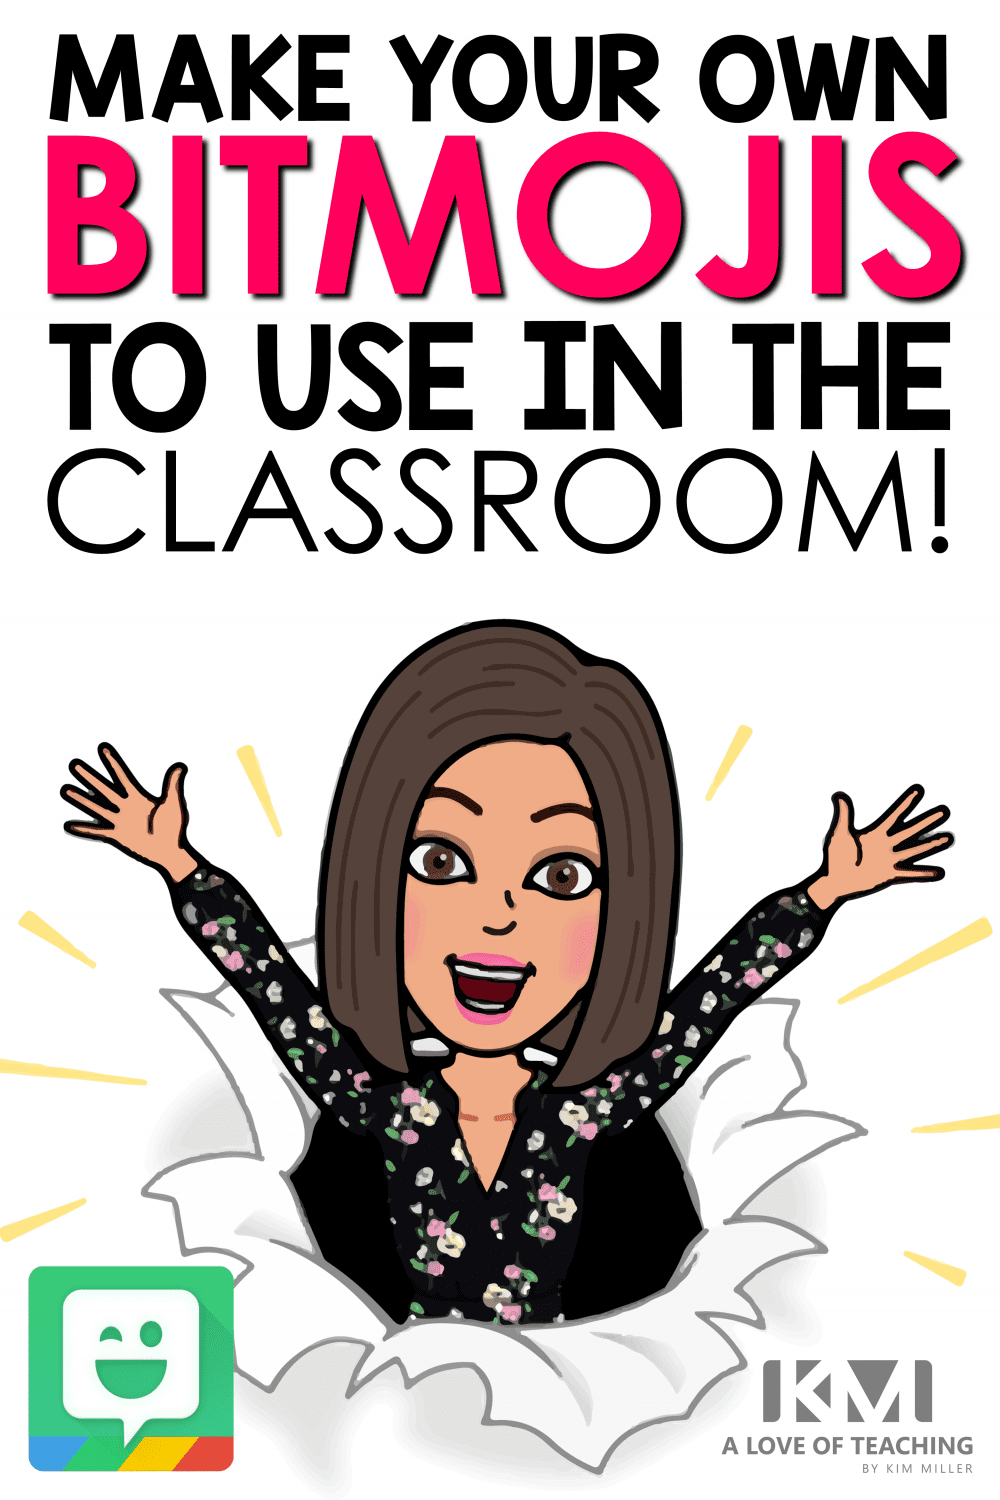 How to Make Your Own Bitmojis to Use in the Classroom